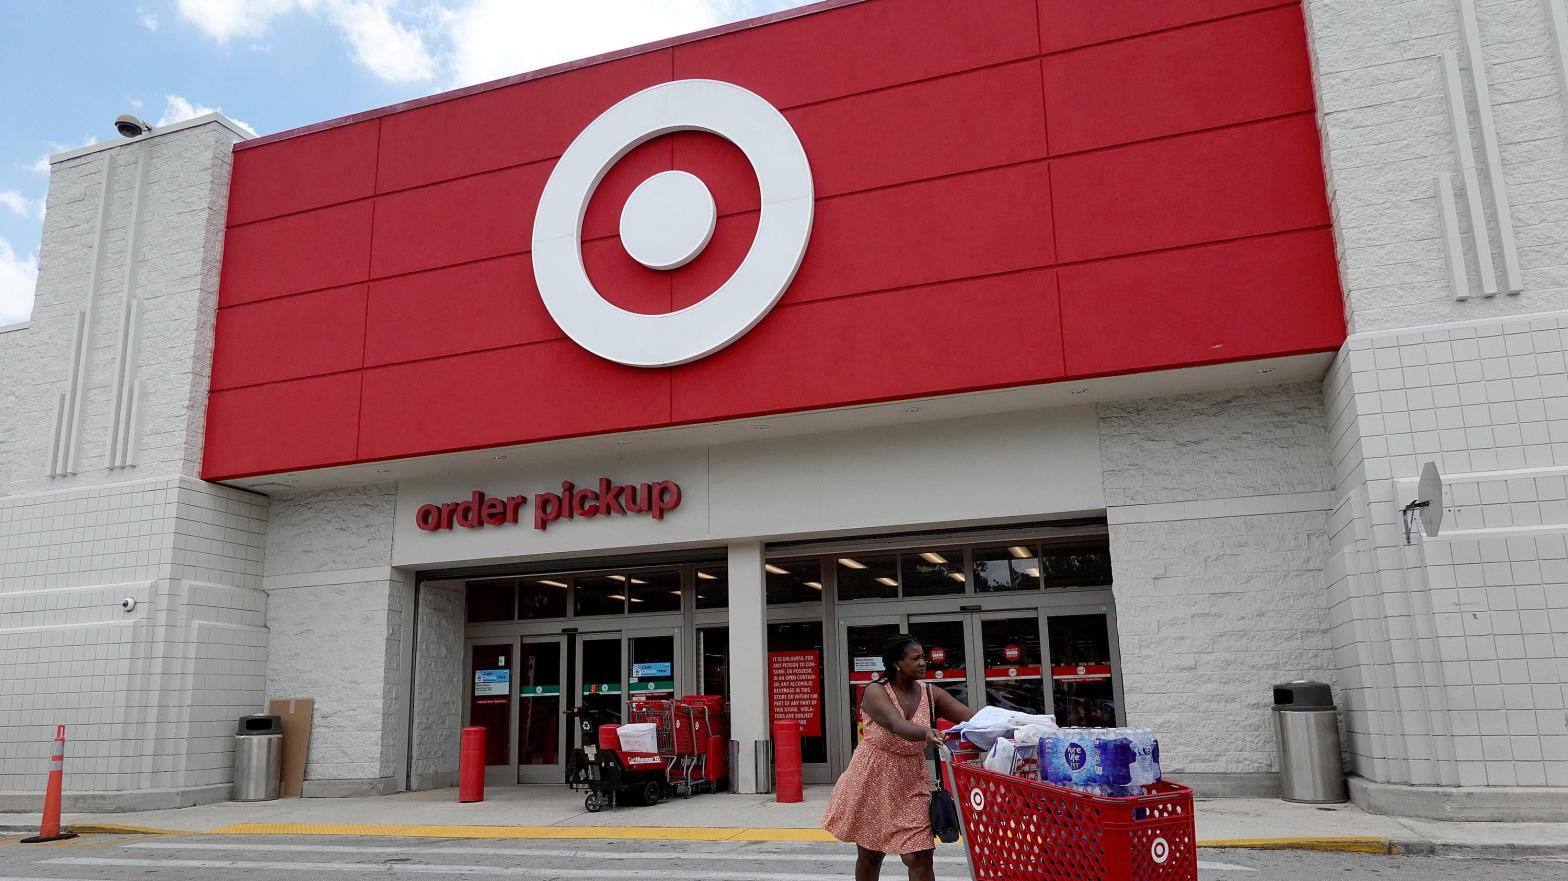 Target says it has been doing its annual Pride month display for years, but only now has the right-wing grievance train switched tracks to target the superstore chain. (Photo: Joe Raedle, Getty Images)